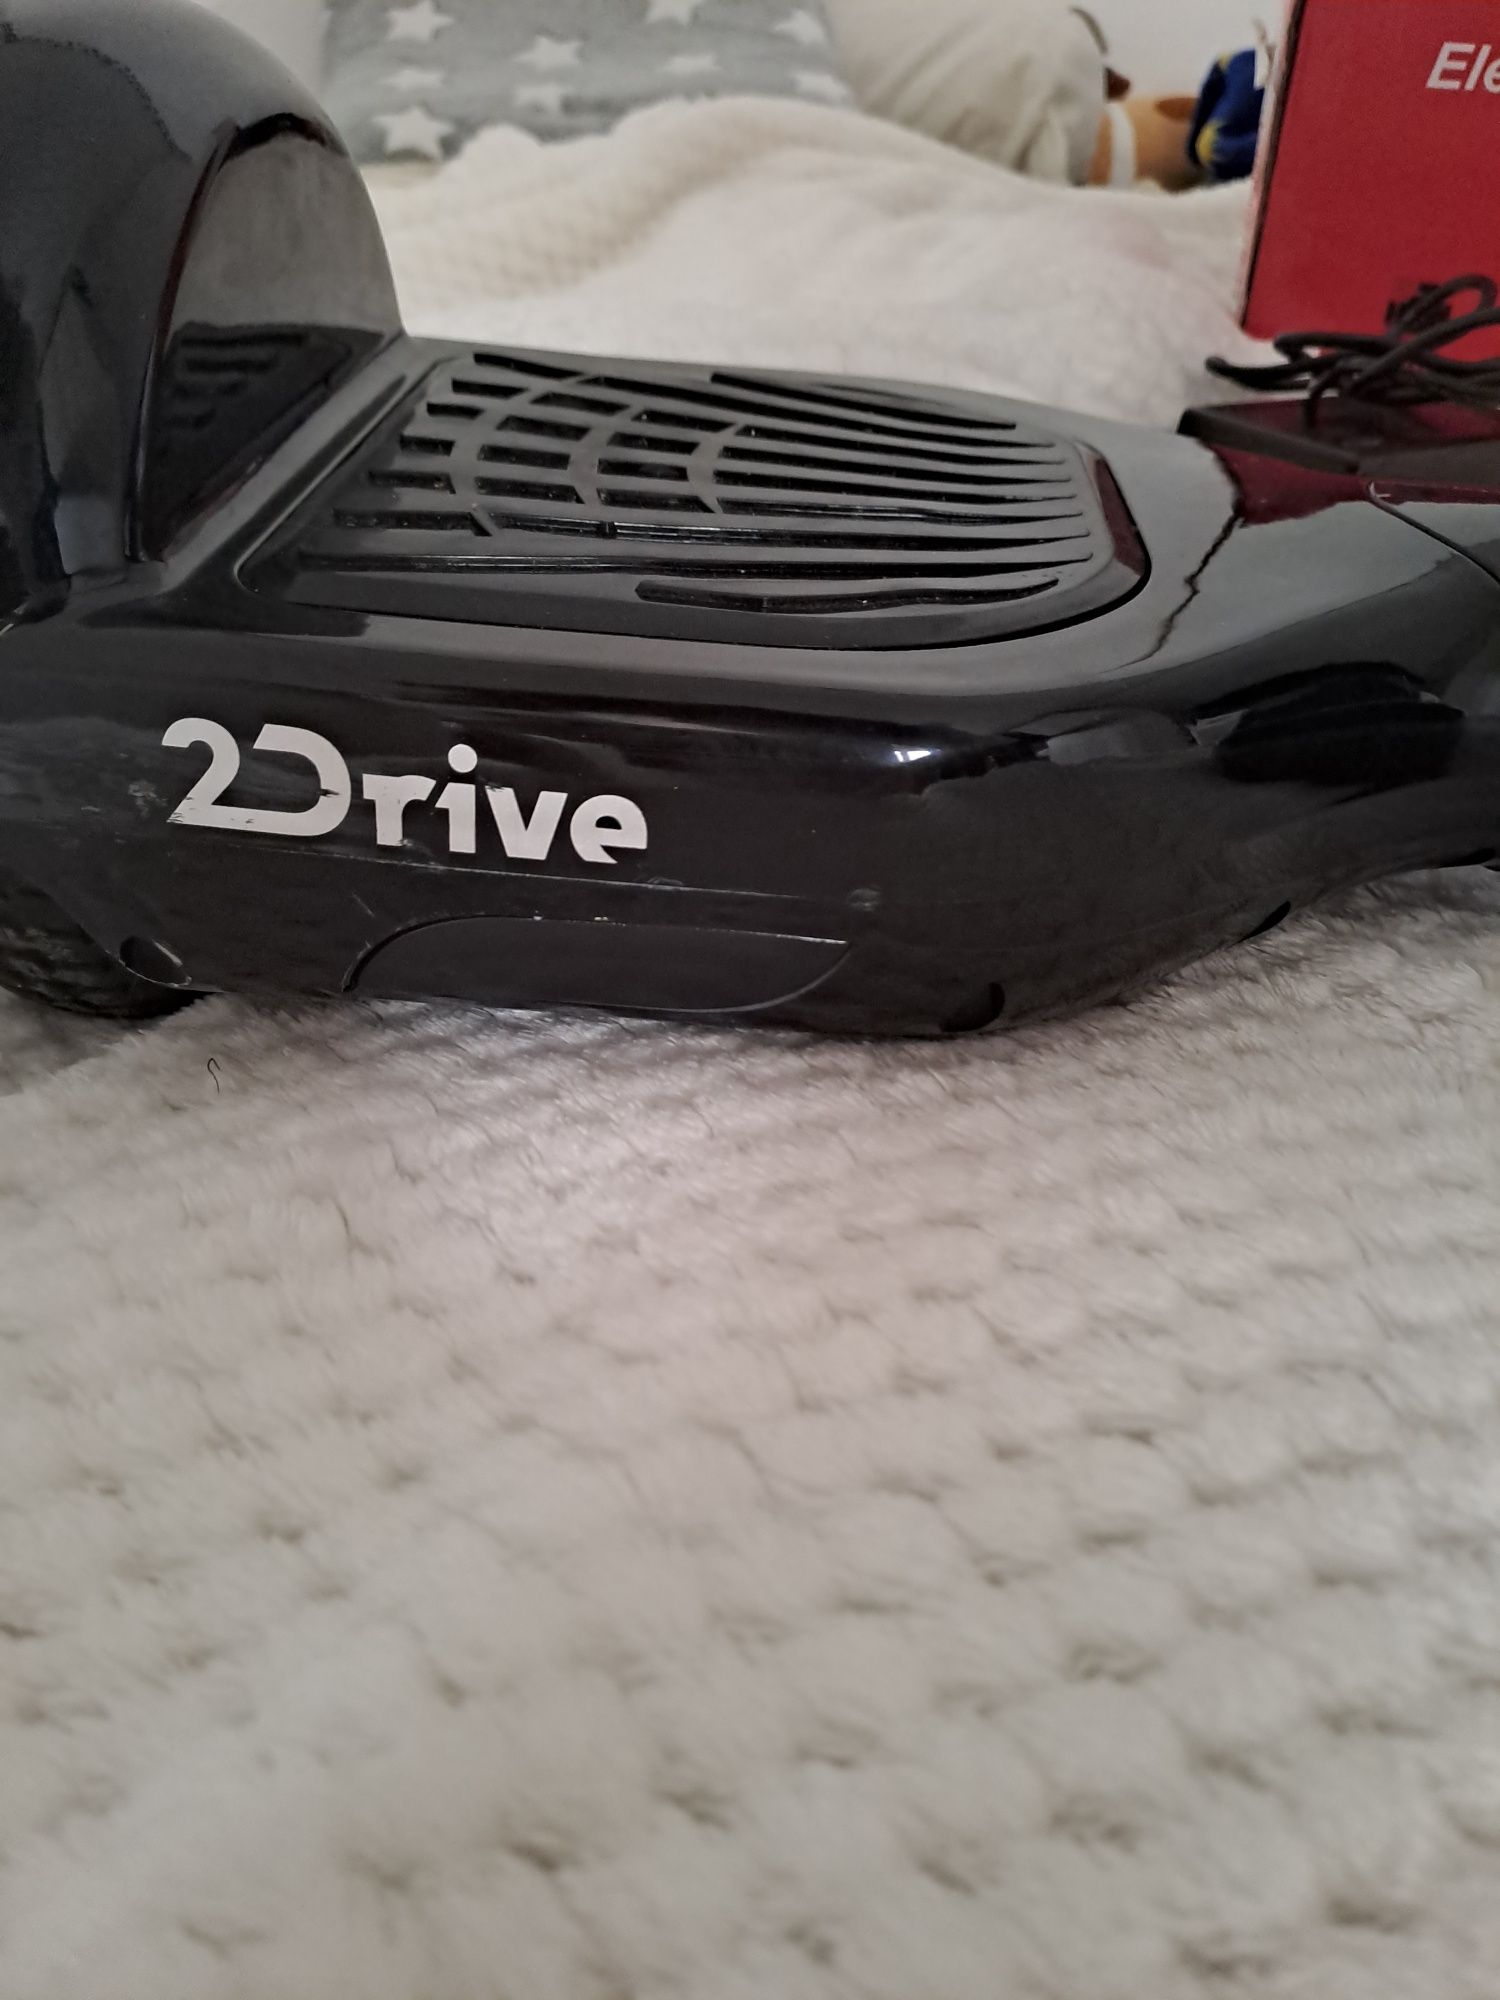 Hoverboard 2Drive